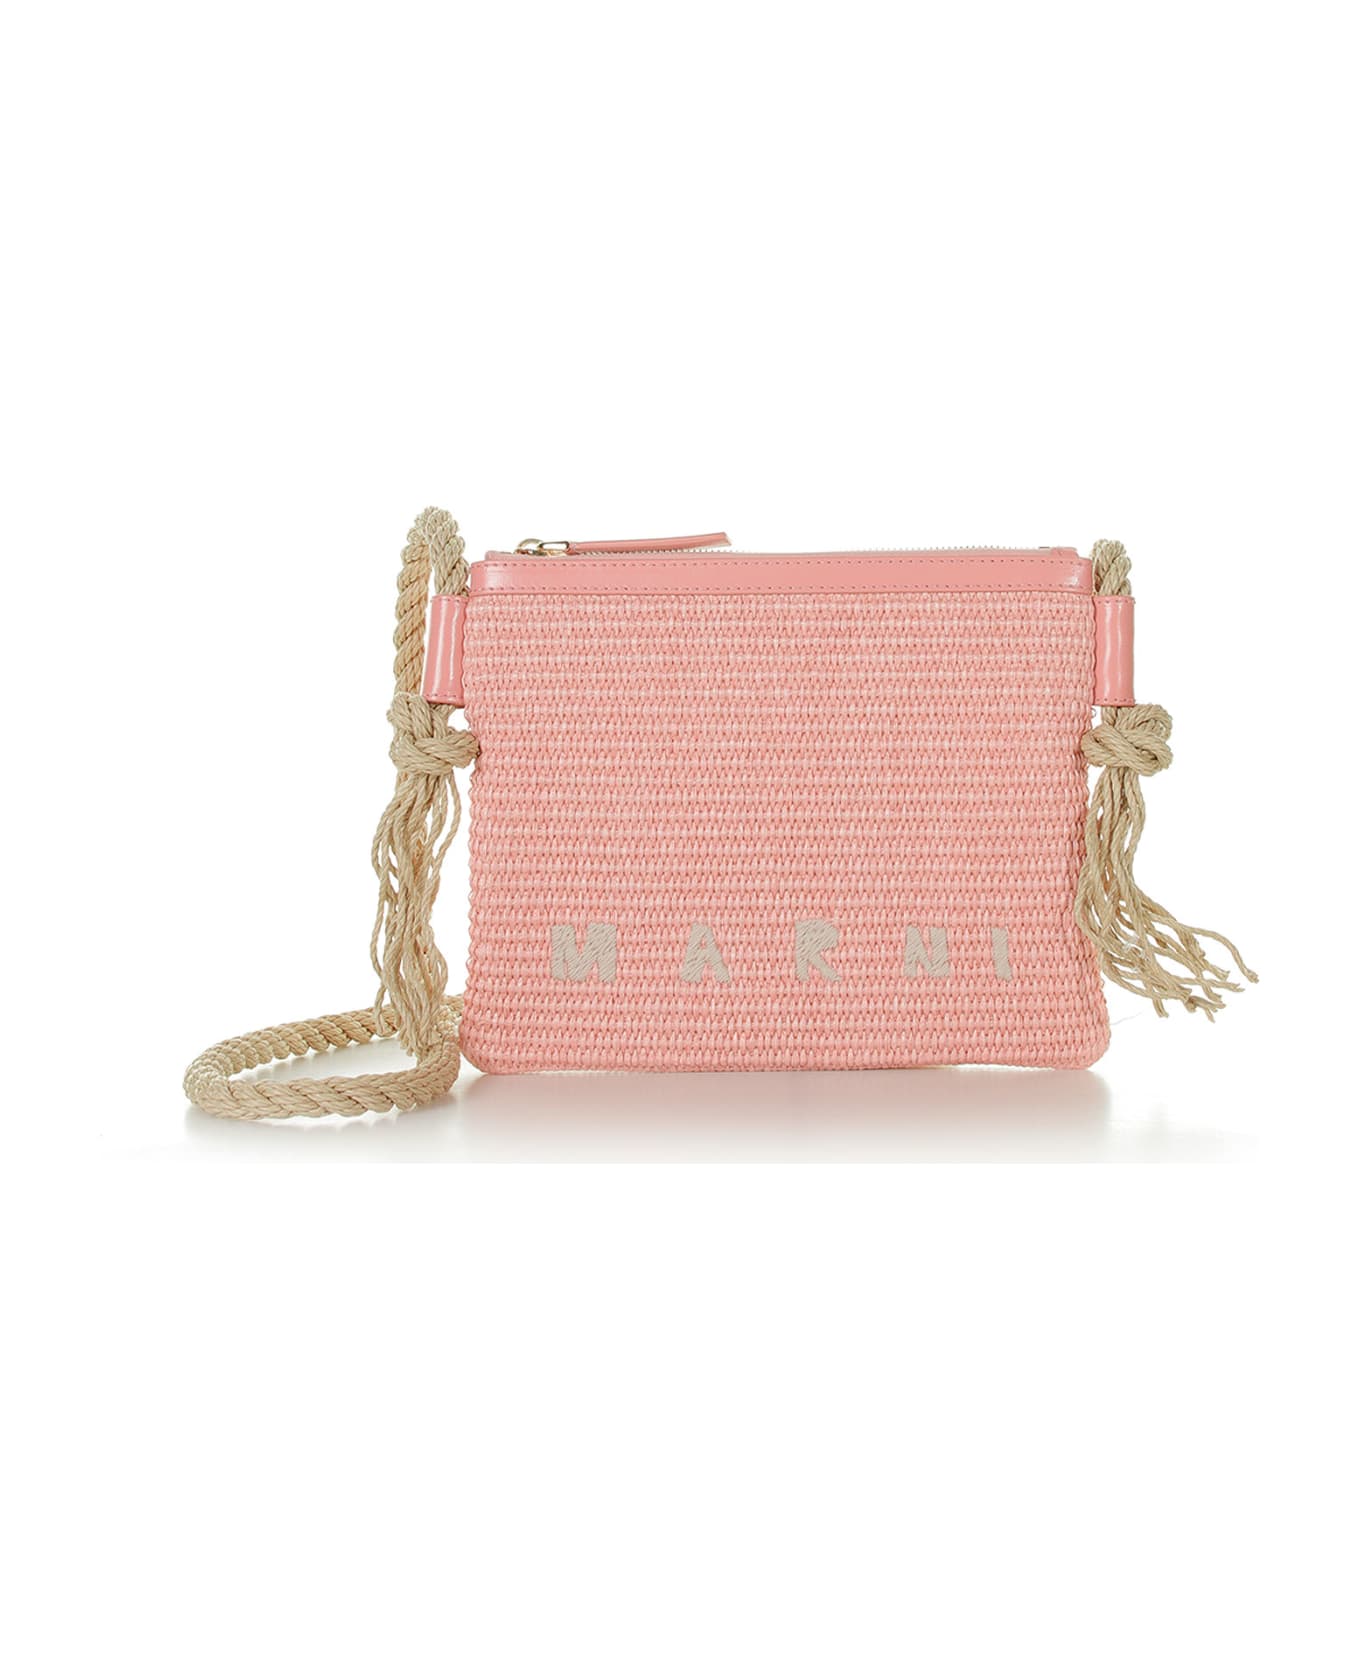 Marni Shoulder Bag In Raffia Fabric With Leather Profiles - LIGHT PINK/LIGHT PINK ショルダーバッグ